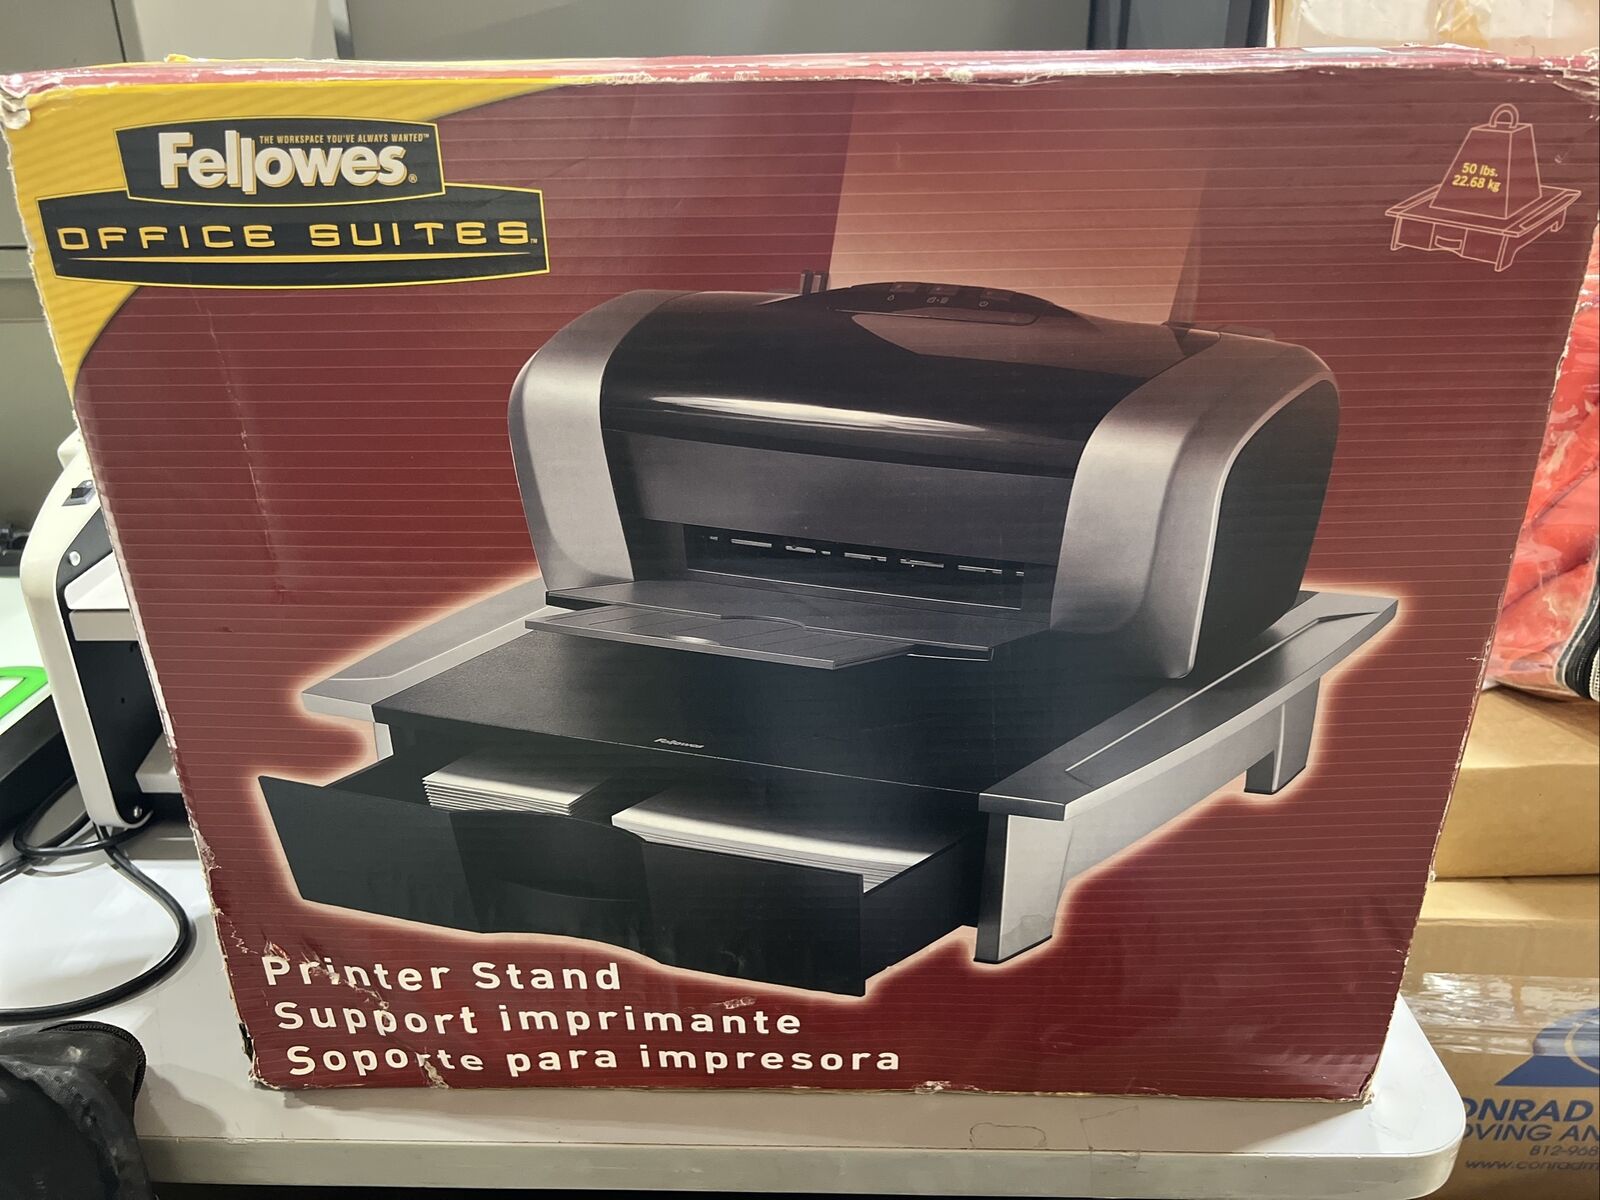 Fellowes Office Suites Printer/Machine Stand 21 1/4 x 18 1/16 x 5 1/4 Black